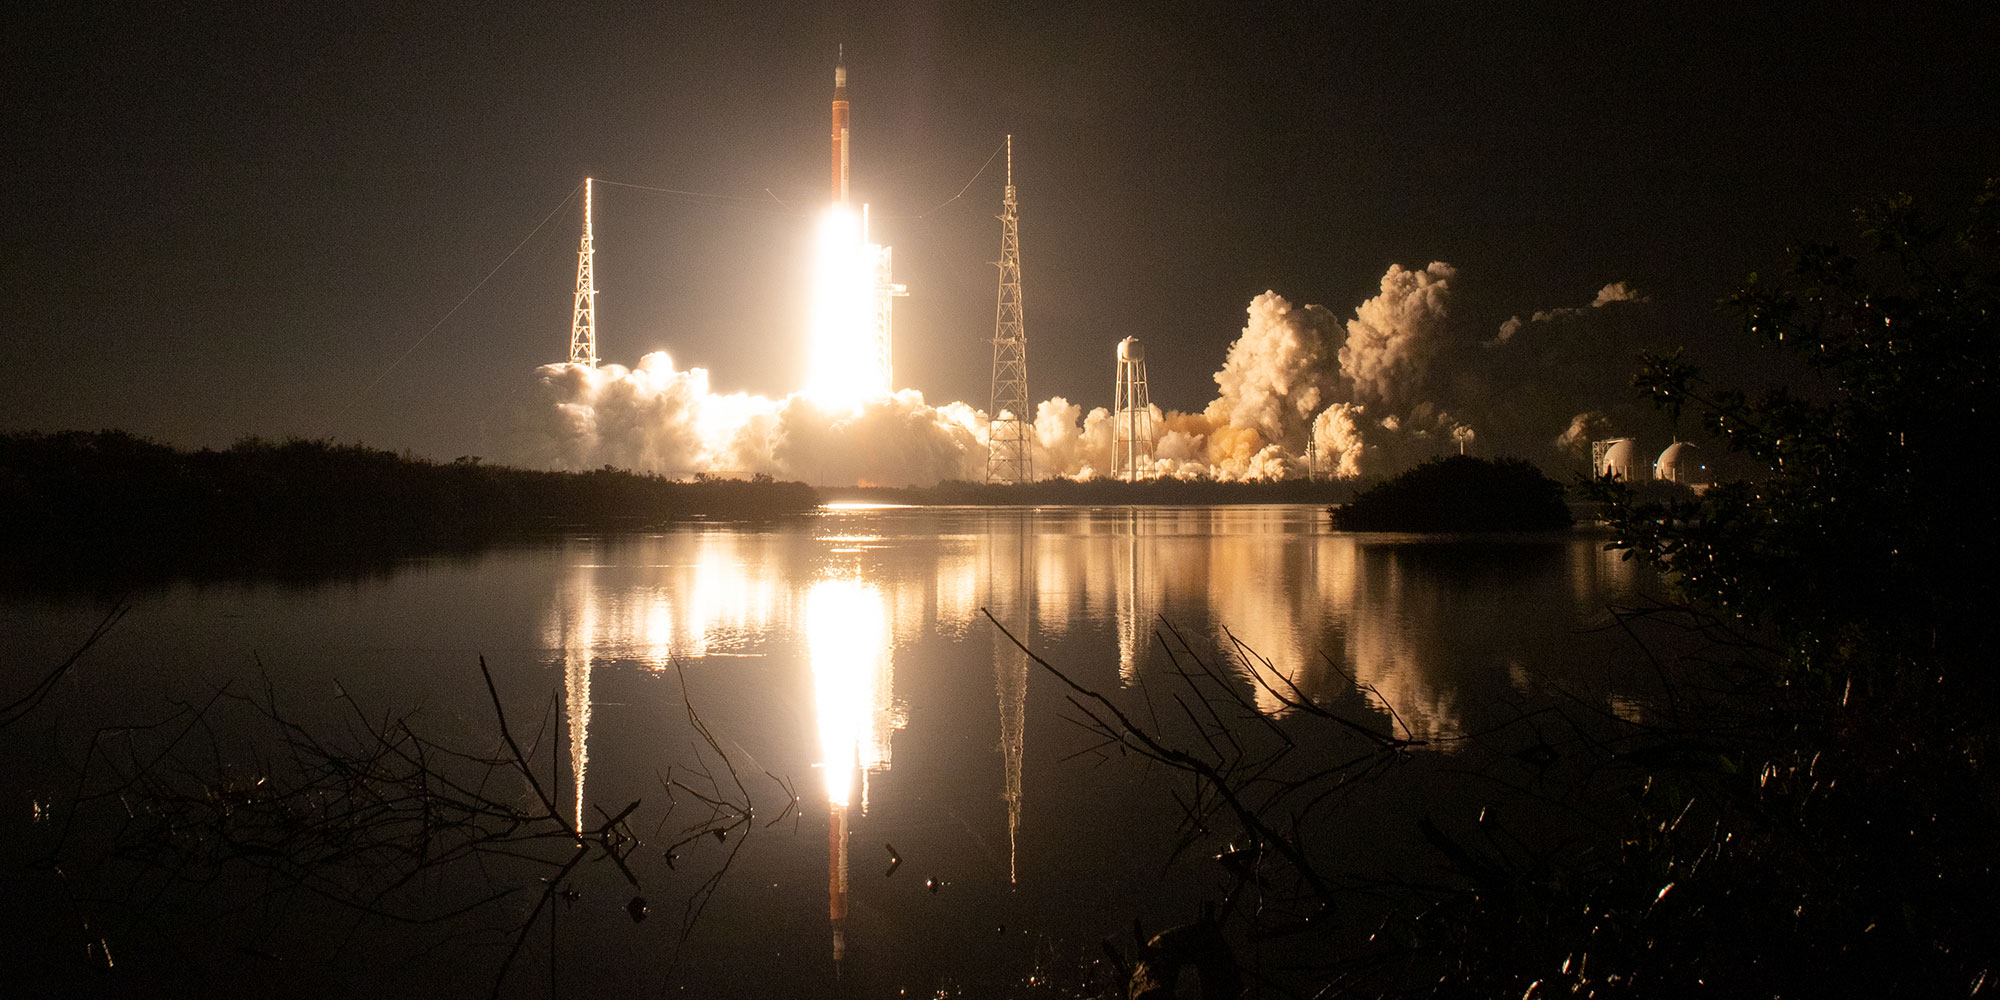 Artemis I launches from the Kennedy Space Center, Florida, November 16, 2022. (Source: NASA)